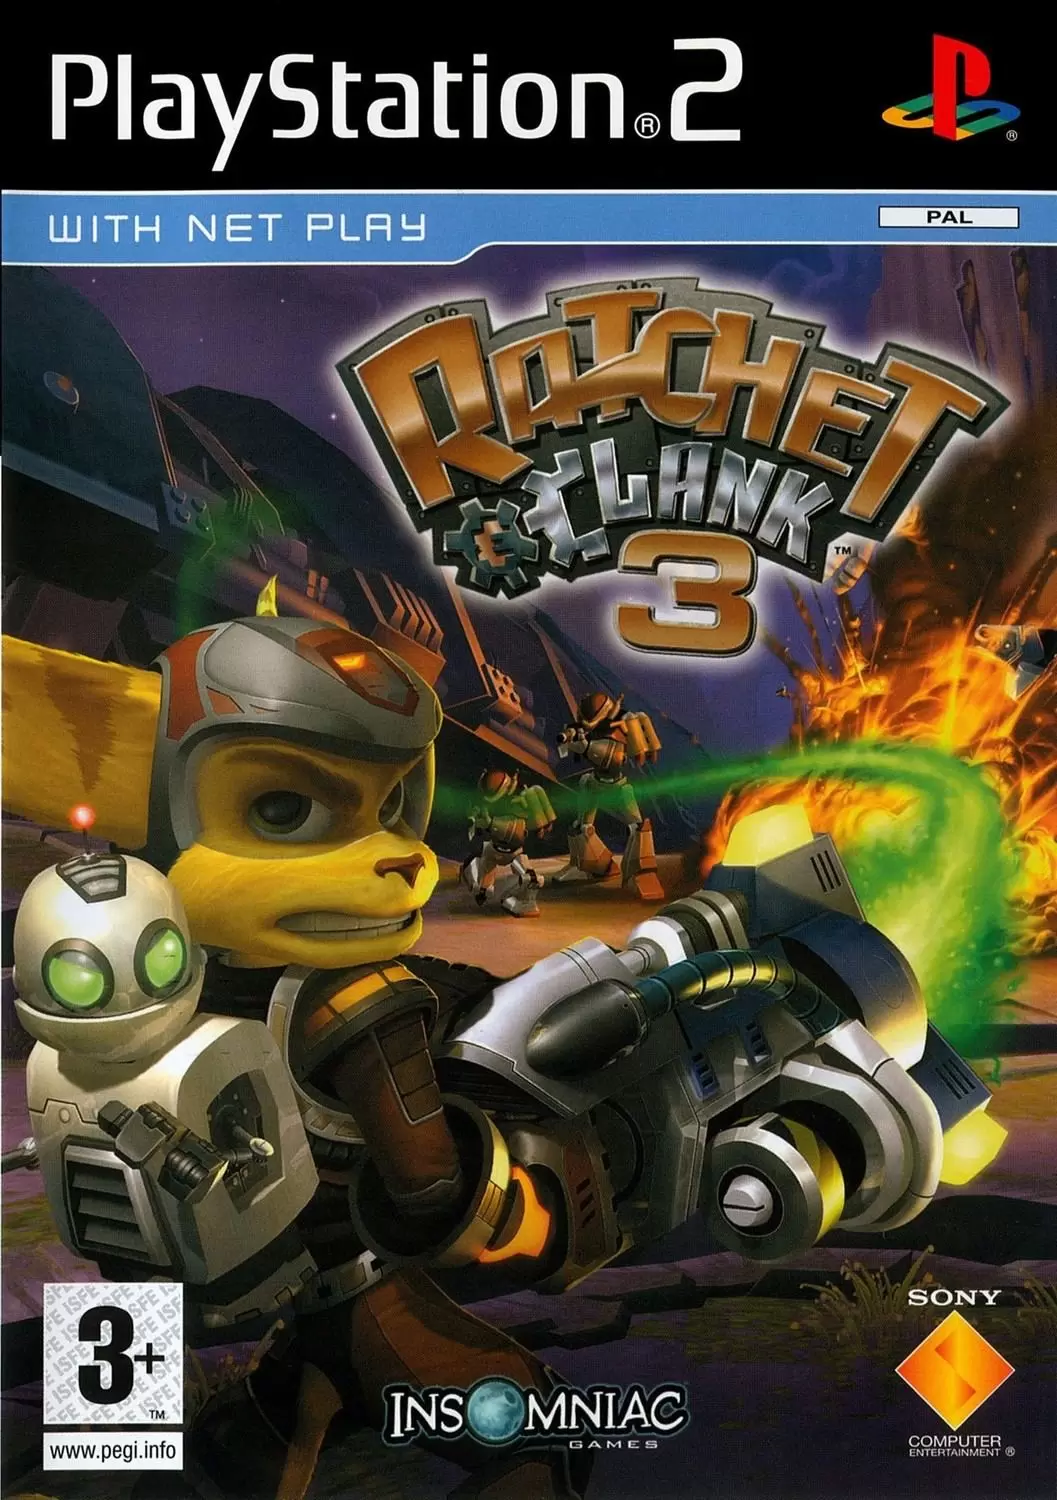 PS2 Games - Ratchet & Clank 3